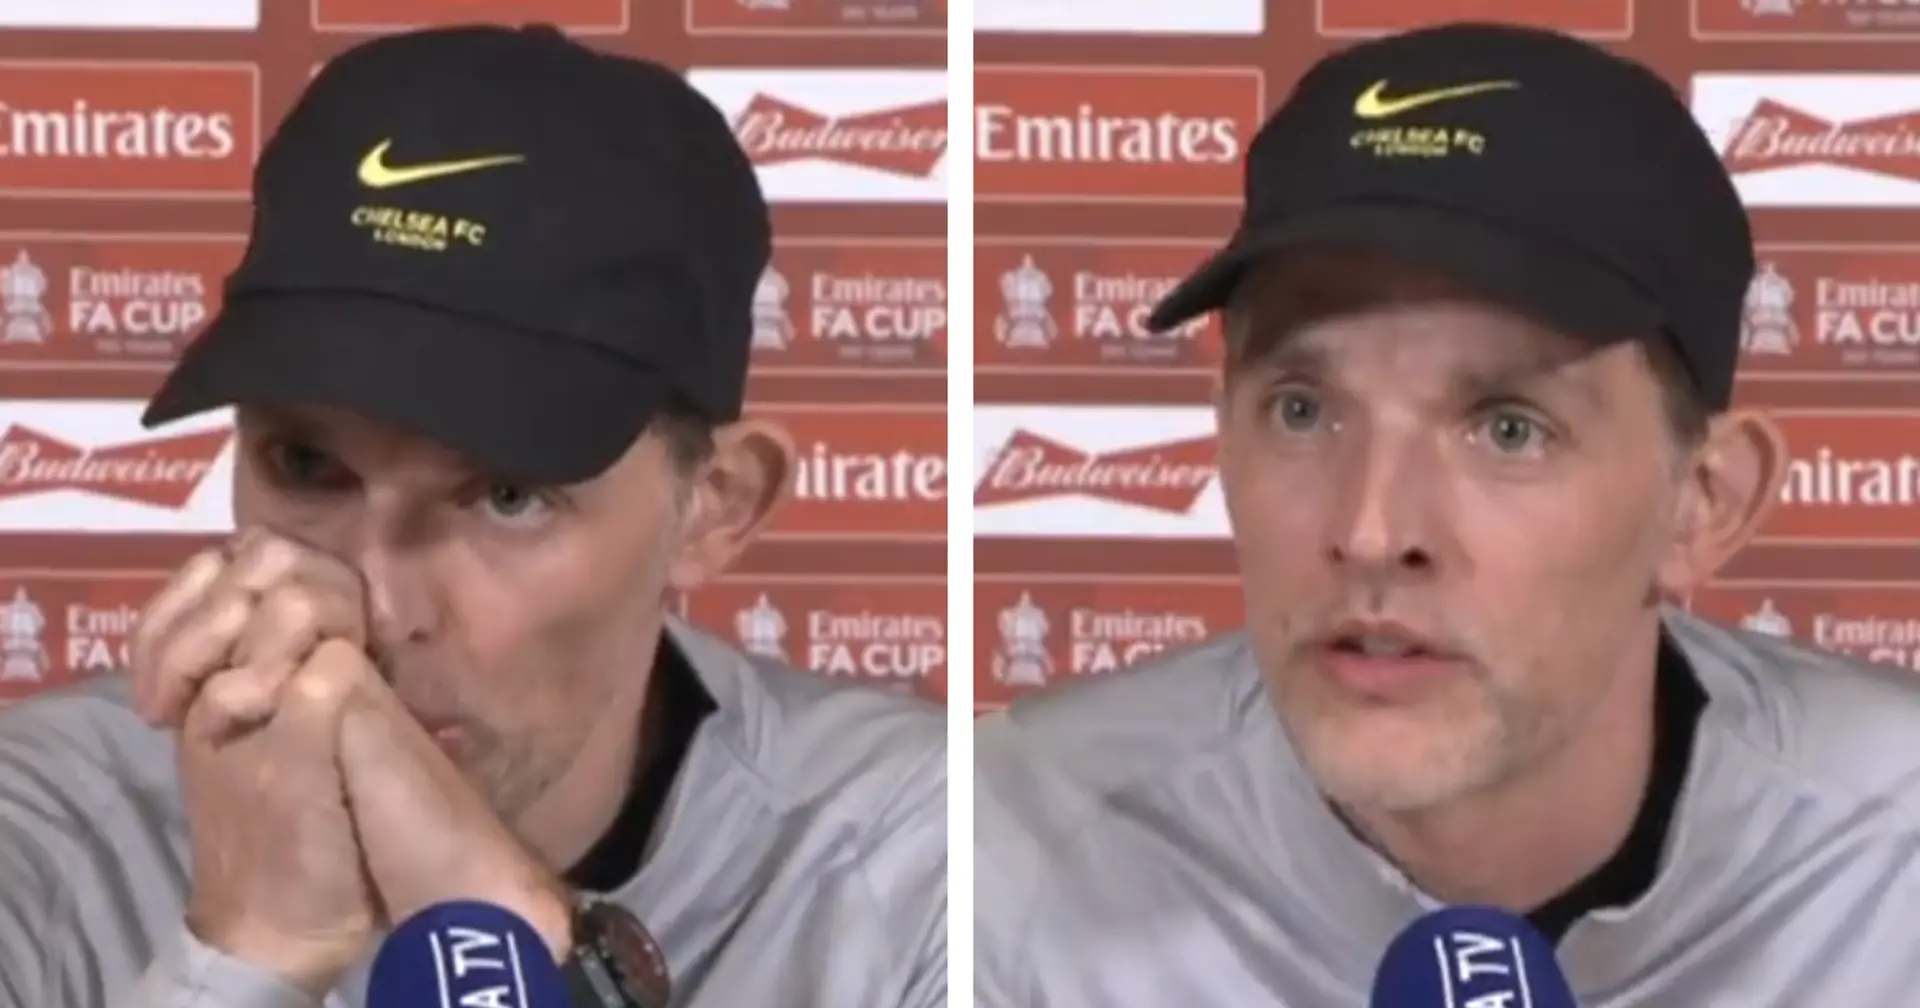 'You have to stop, I'm not a politician!': Thomas Tuchel explodes at reporter after Russia questions